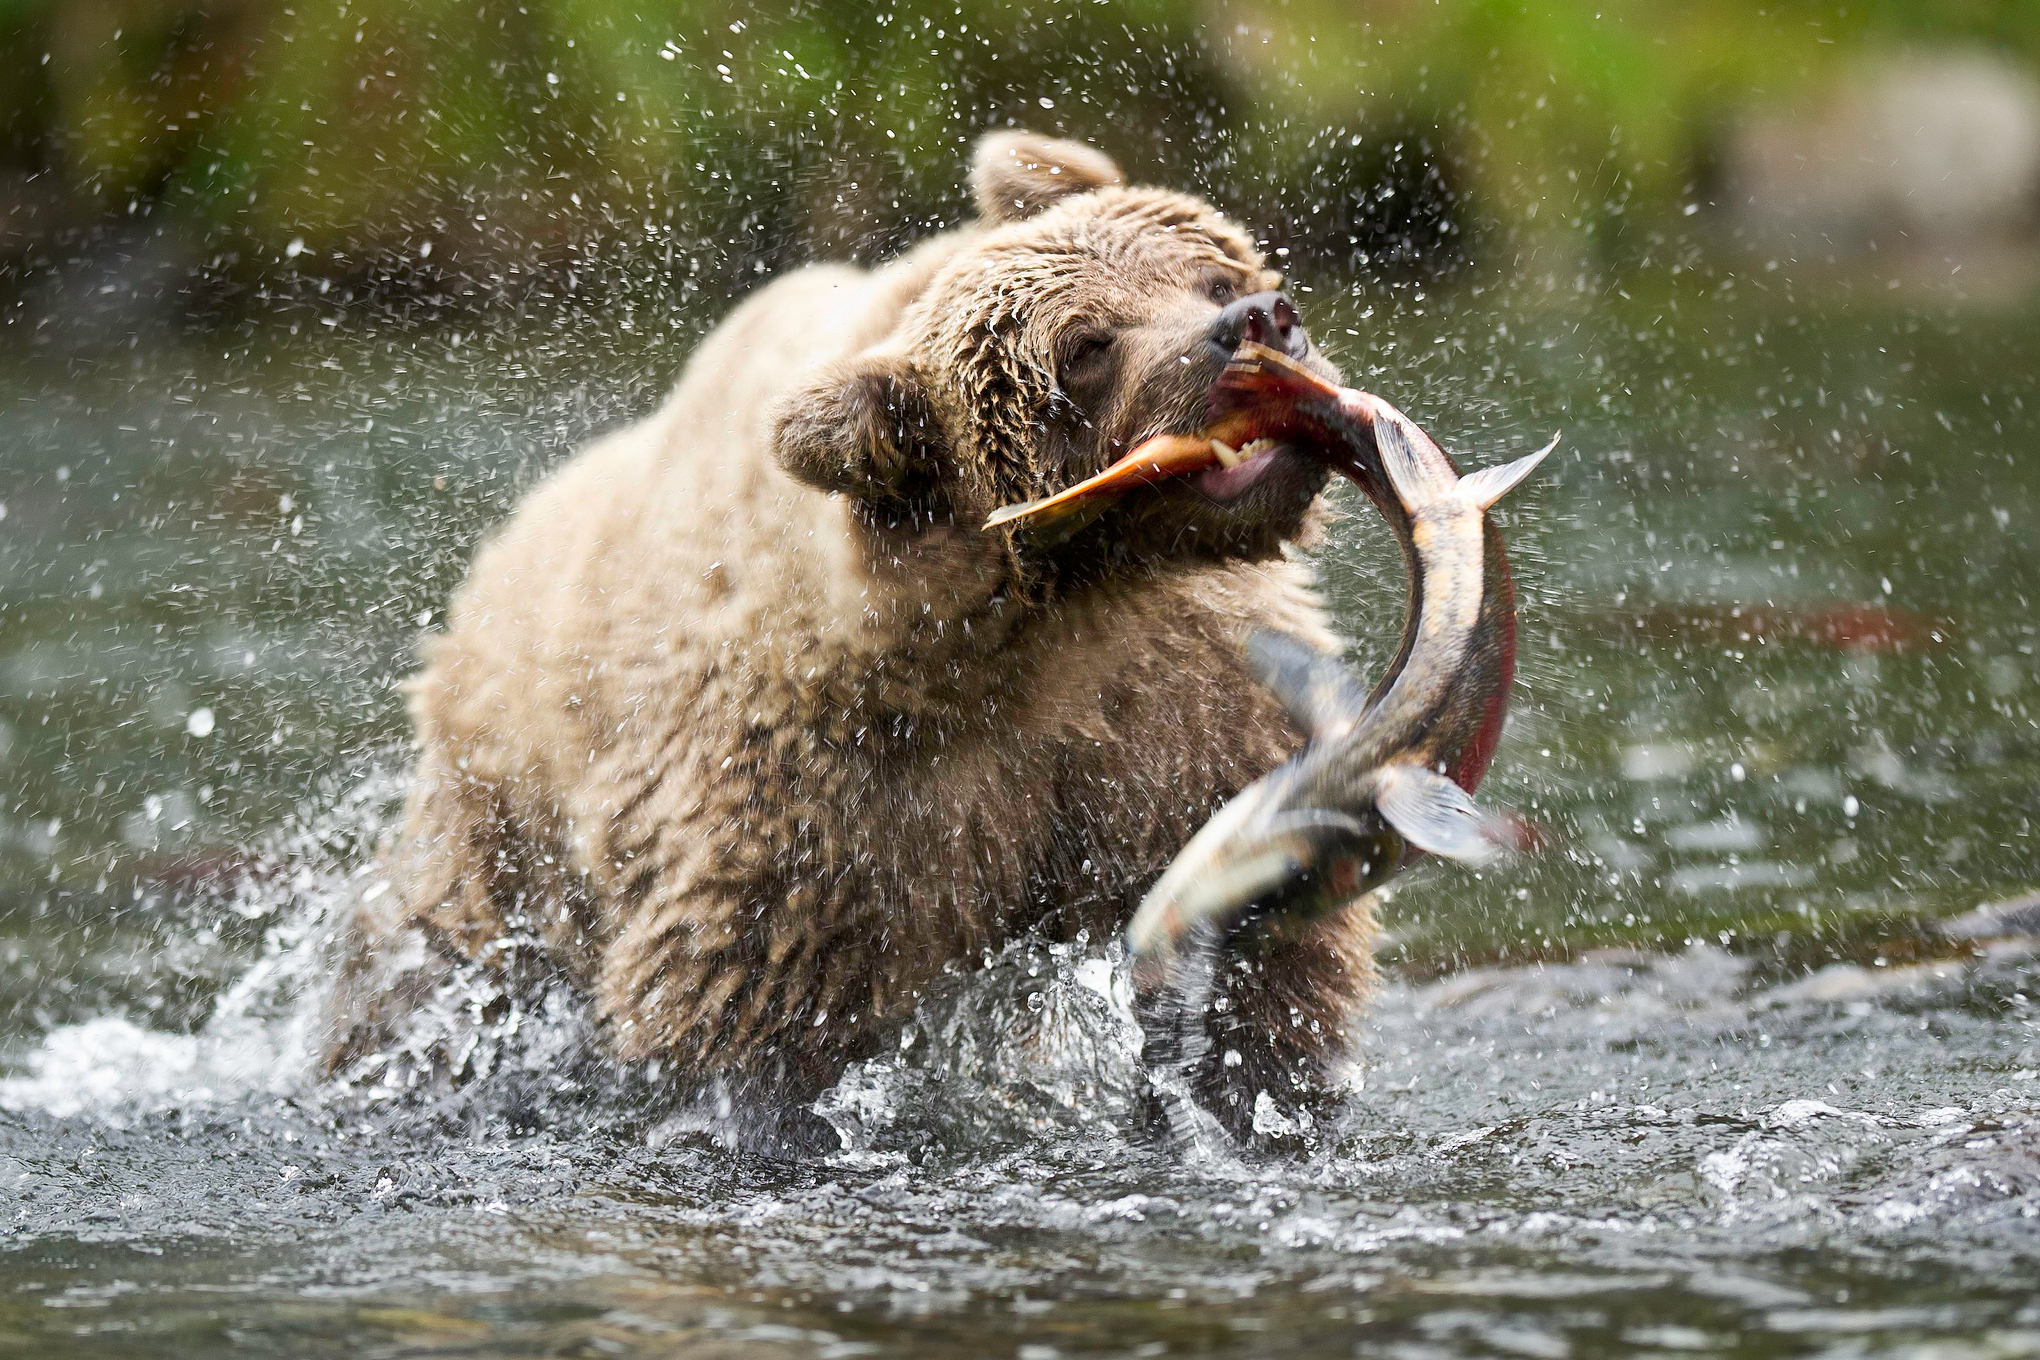 grizzly, Bears, Fishes, Hunting, Food, Rivers, Alaska, Nature, Drops Wallpaper